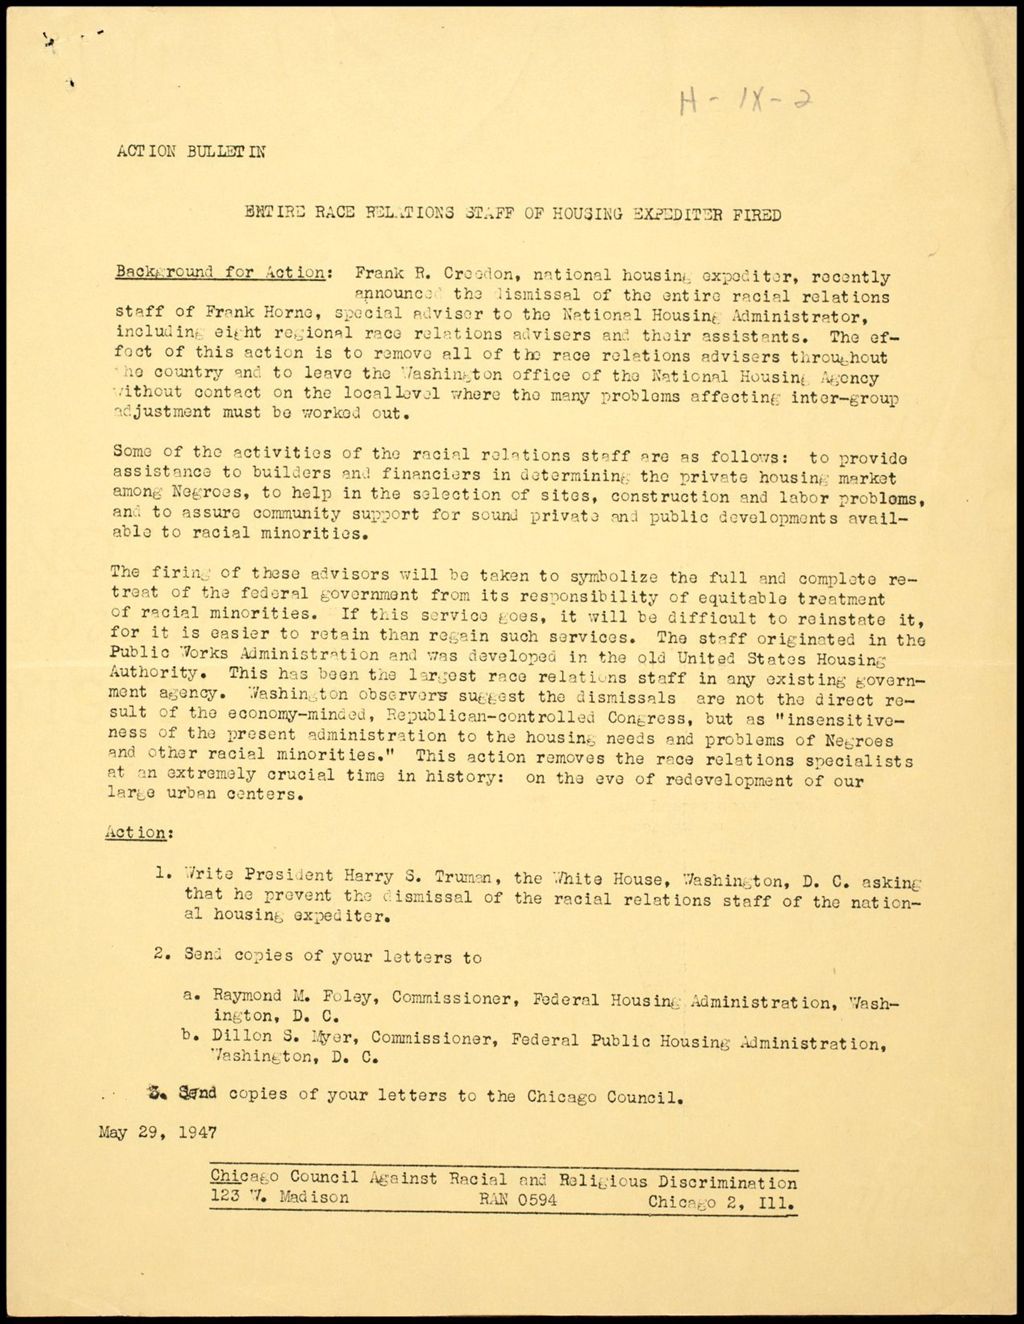 Miniature of Human Relations Department - Chicago Council Against Racial and Religious Discrimination, 1947-1950 (Folder I-2629)